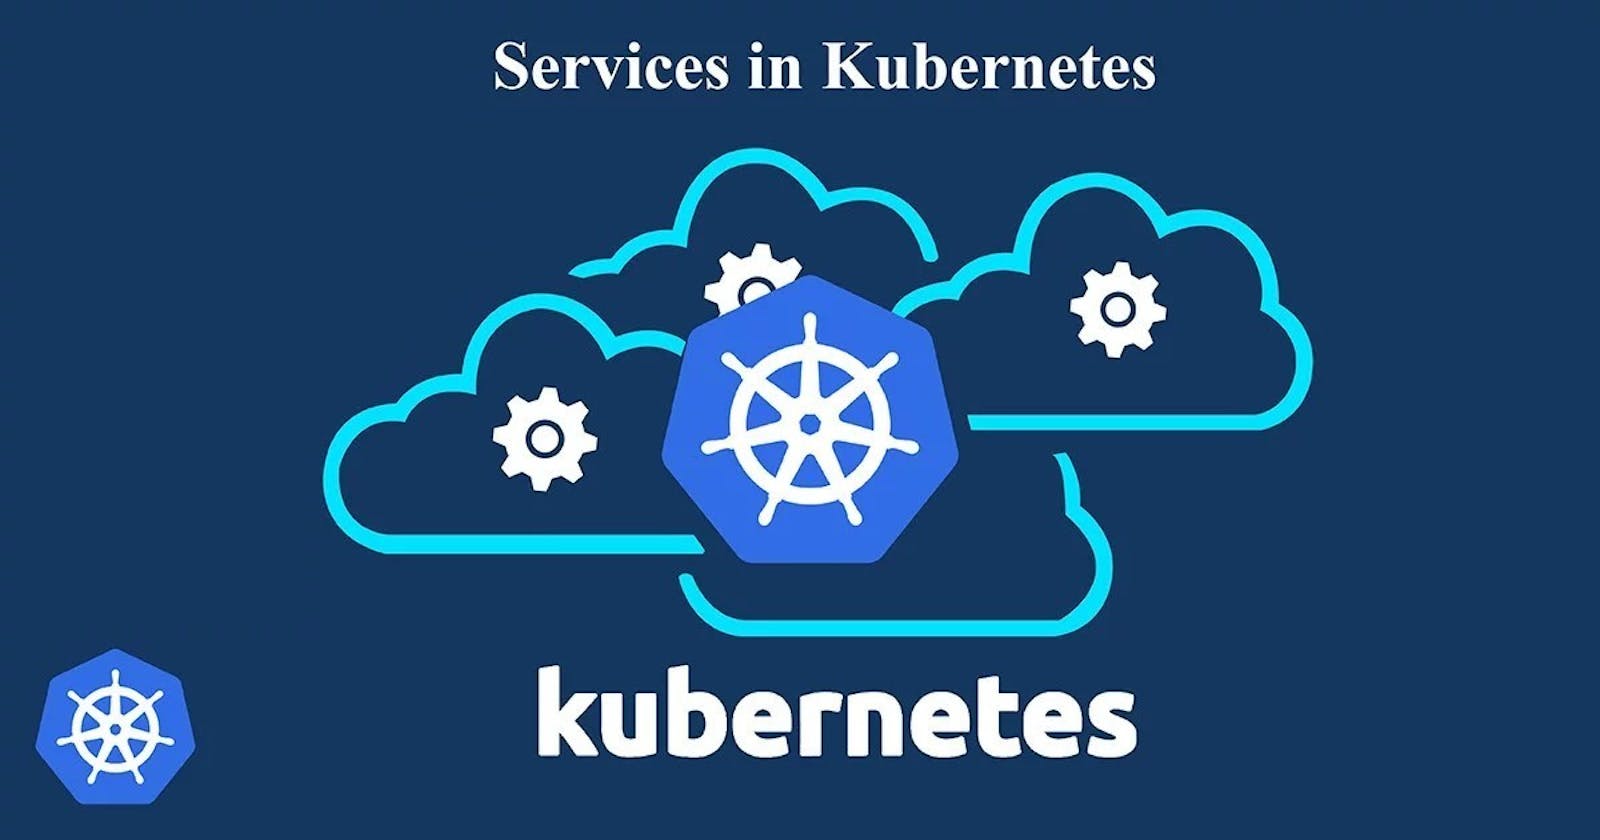 Working with Services in Kubernetes